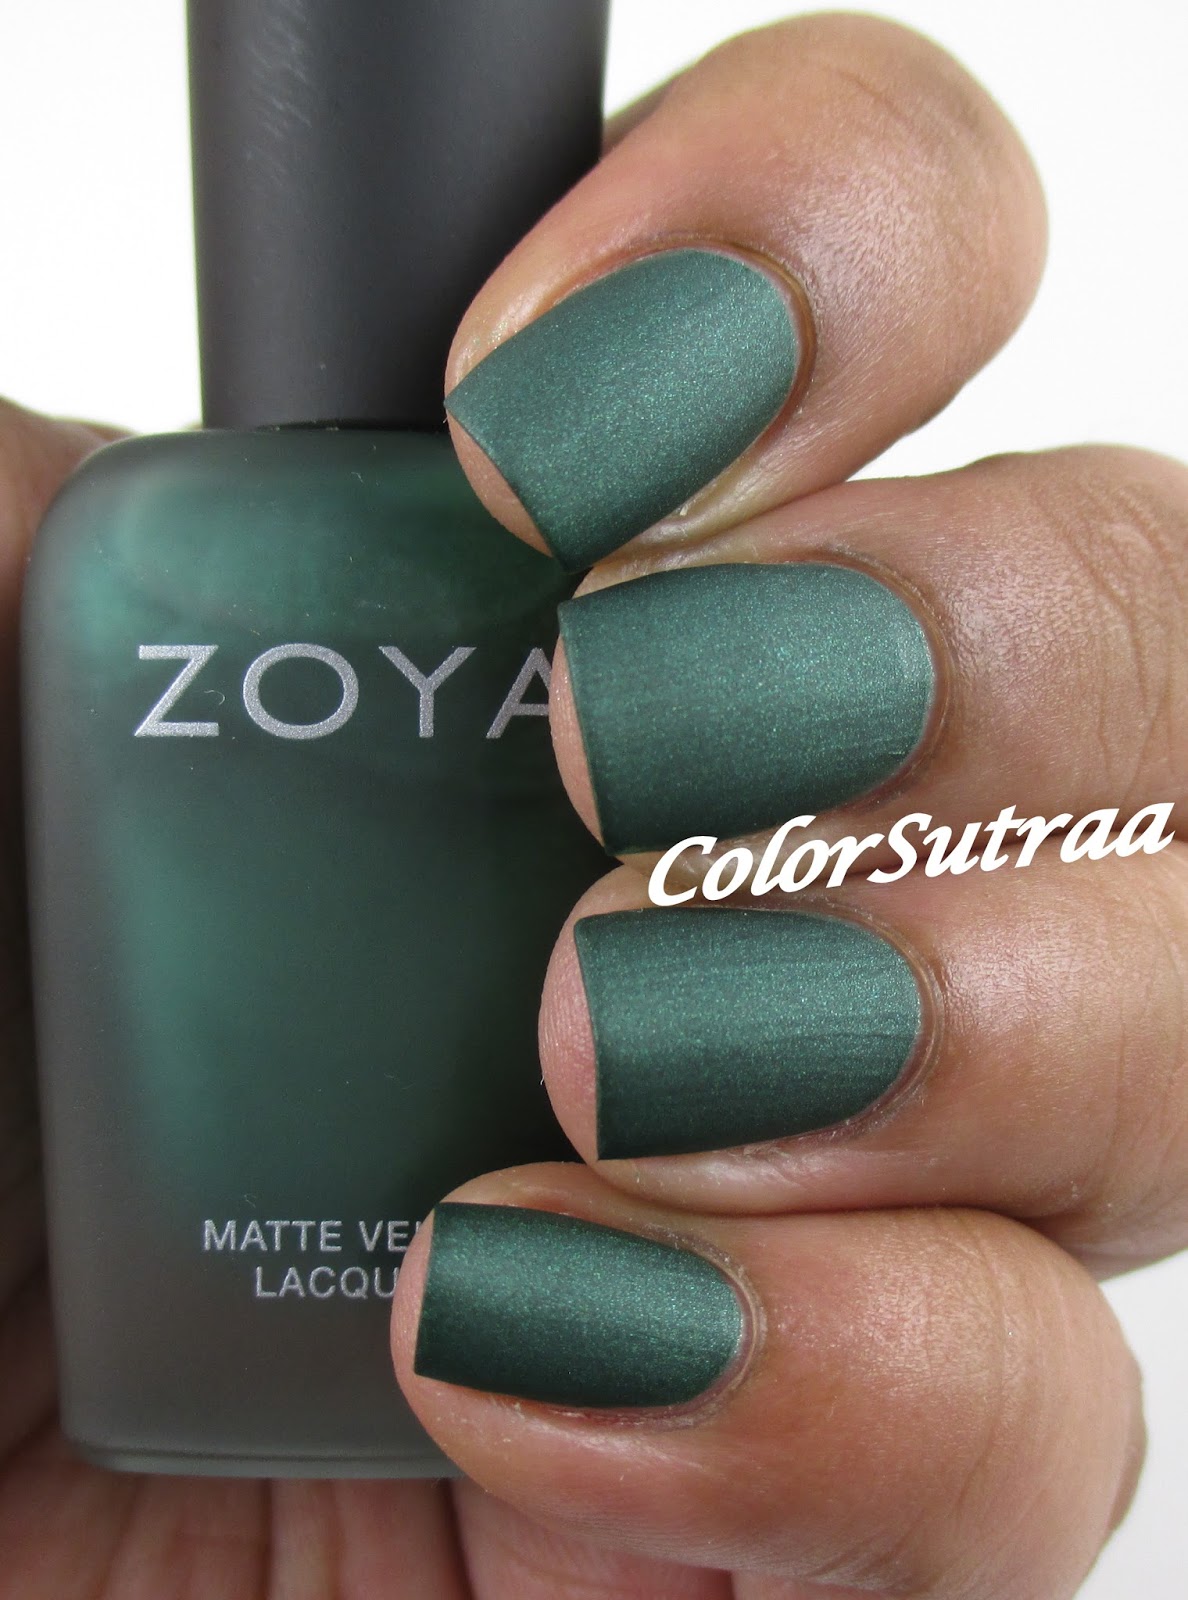 ZOYA Matte Velvets : Swatches and Review - ColorSutraa